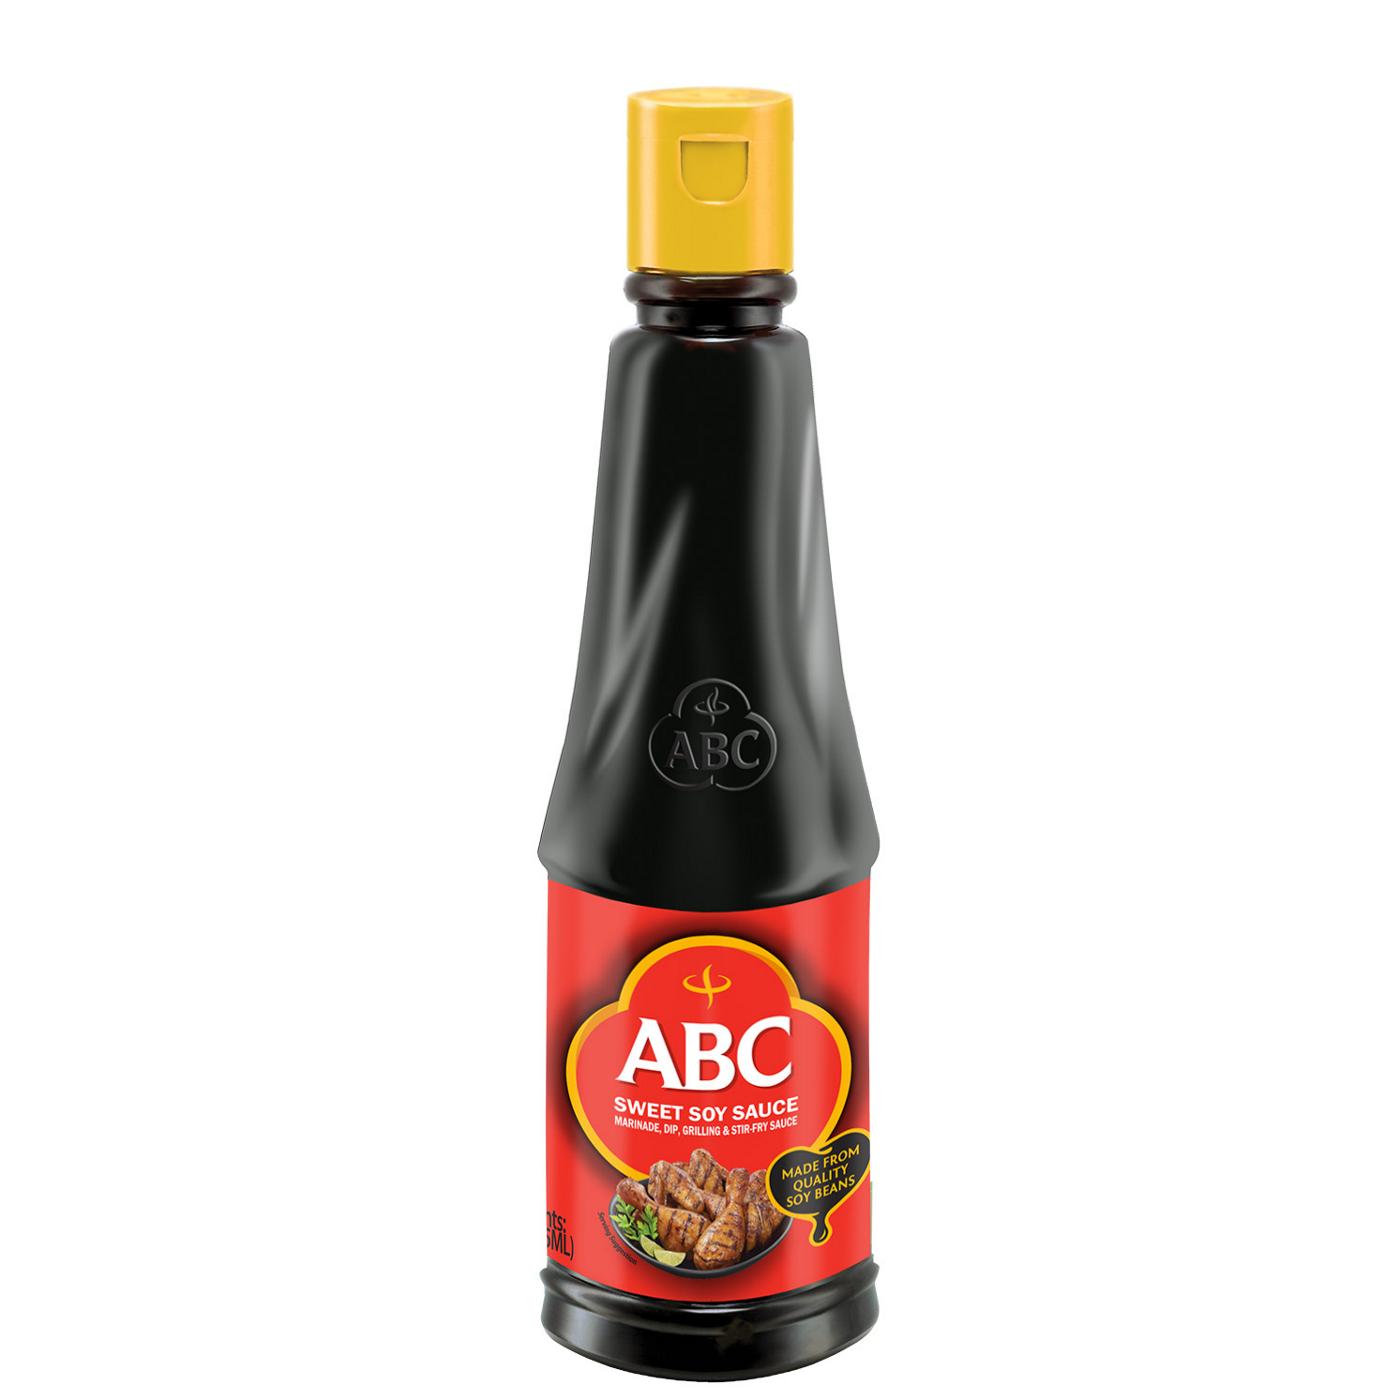 ABC Sweet Soy Sauce; image 1 of 5